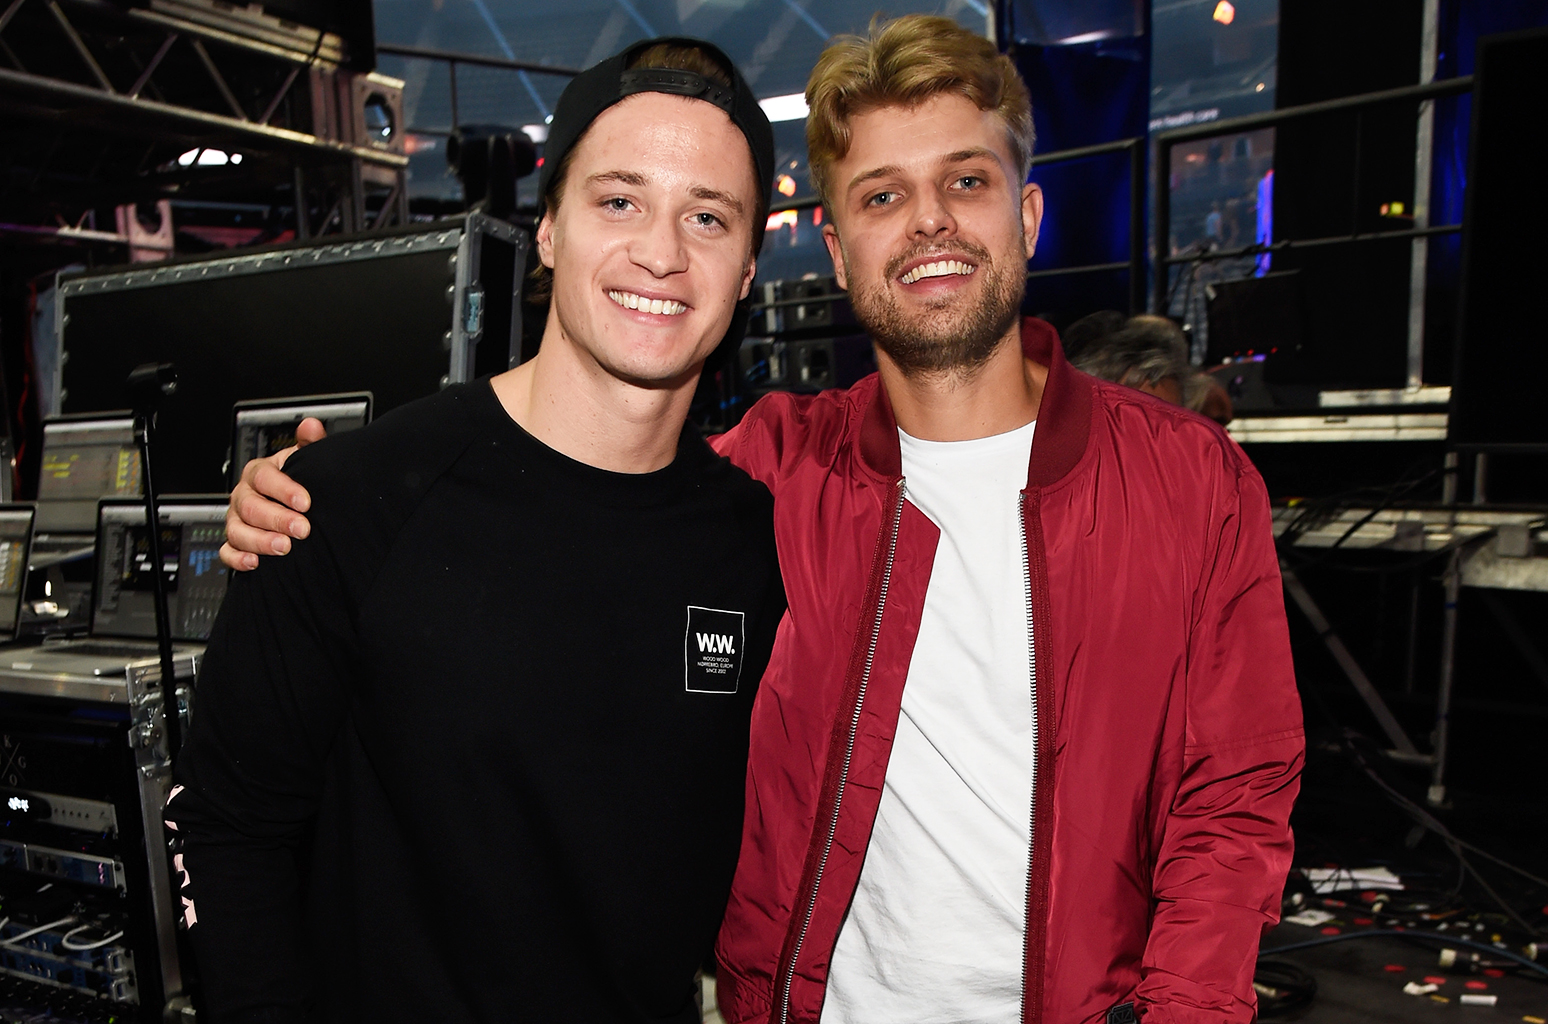 Kygo And Sandro Cavazza Debut 'Happy Now' Collab At iHeartRadio Music Festival: Watch